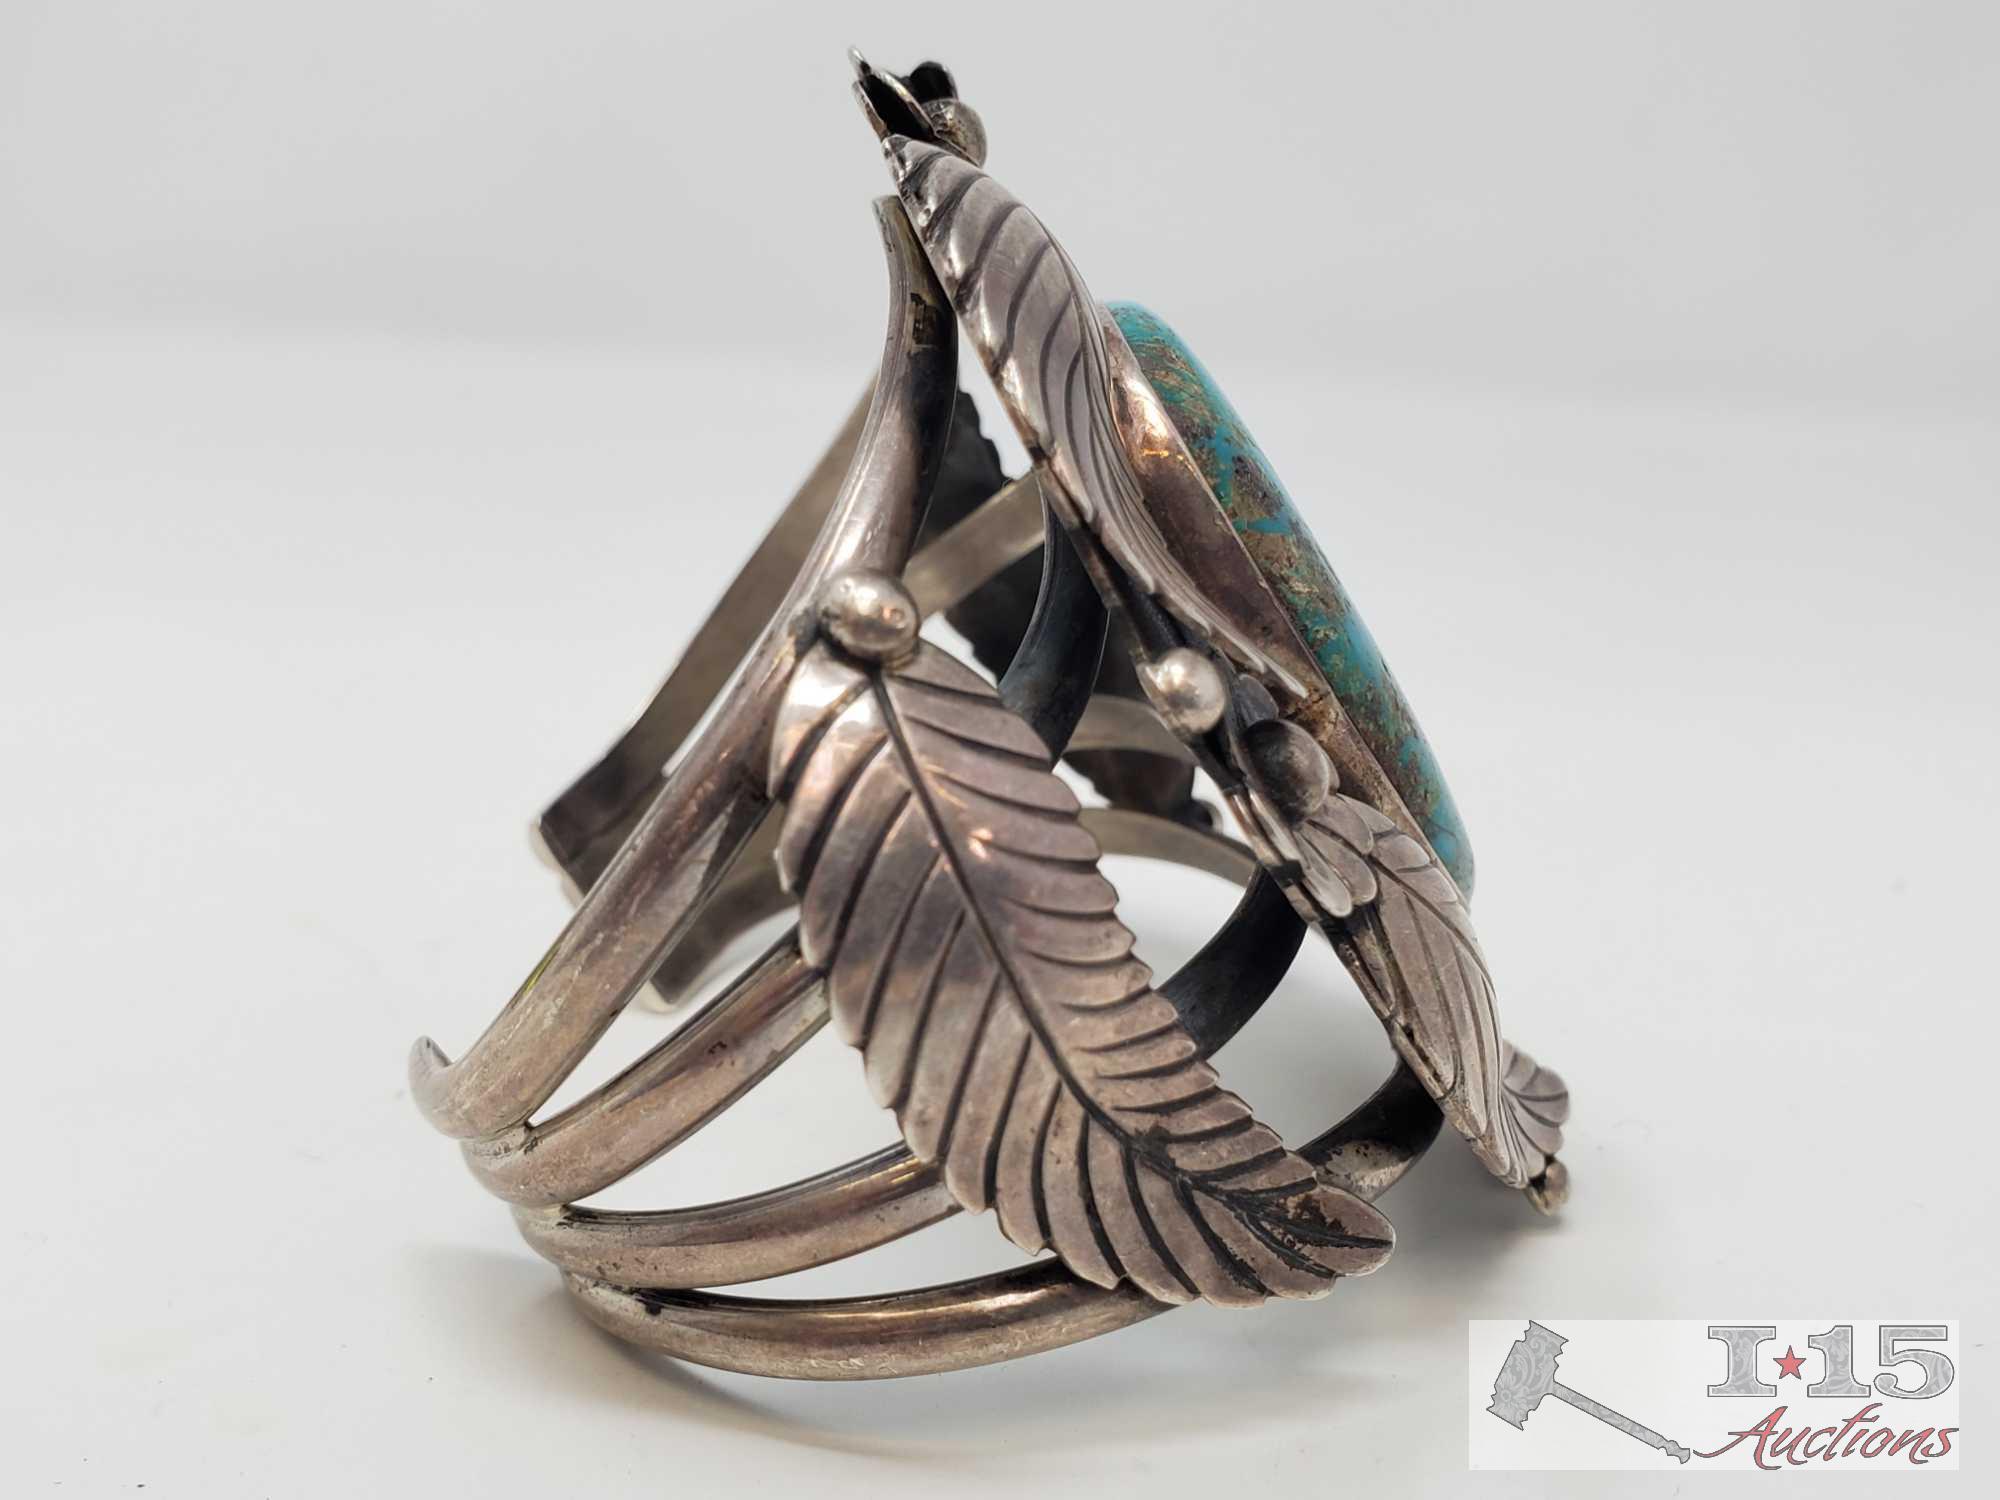 One of a Kind Rare Large Sterling silver Cuff Bracelet with large Turquoise Stone Marked By Artist